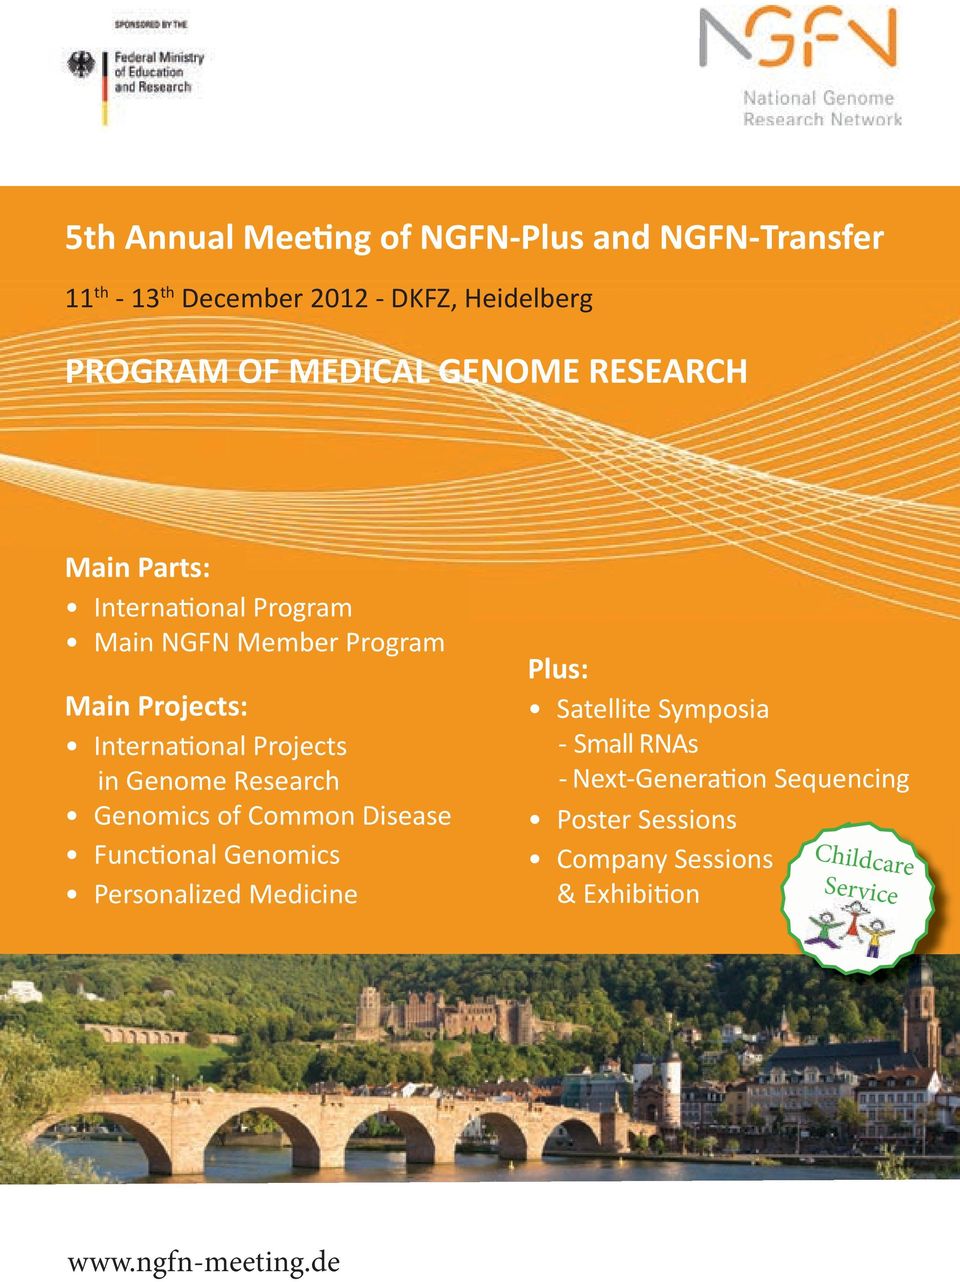 Functional Genomics Personalized Medicine Plus: Satellite Symposia - Small RNAs - Next-Generation Sequencing Poster Sessions Company